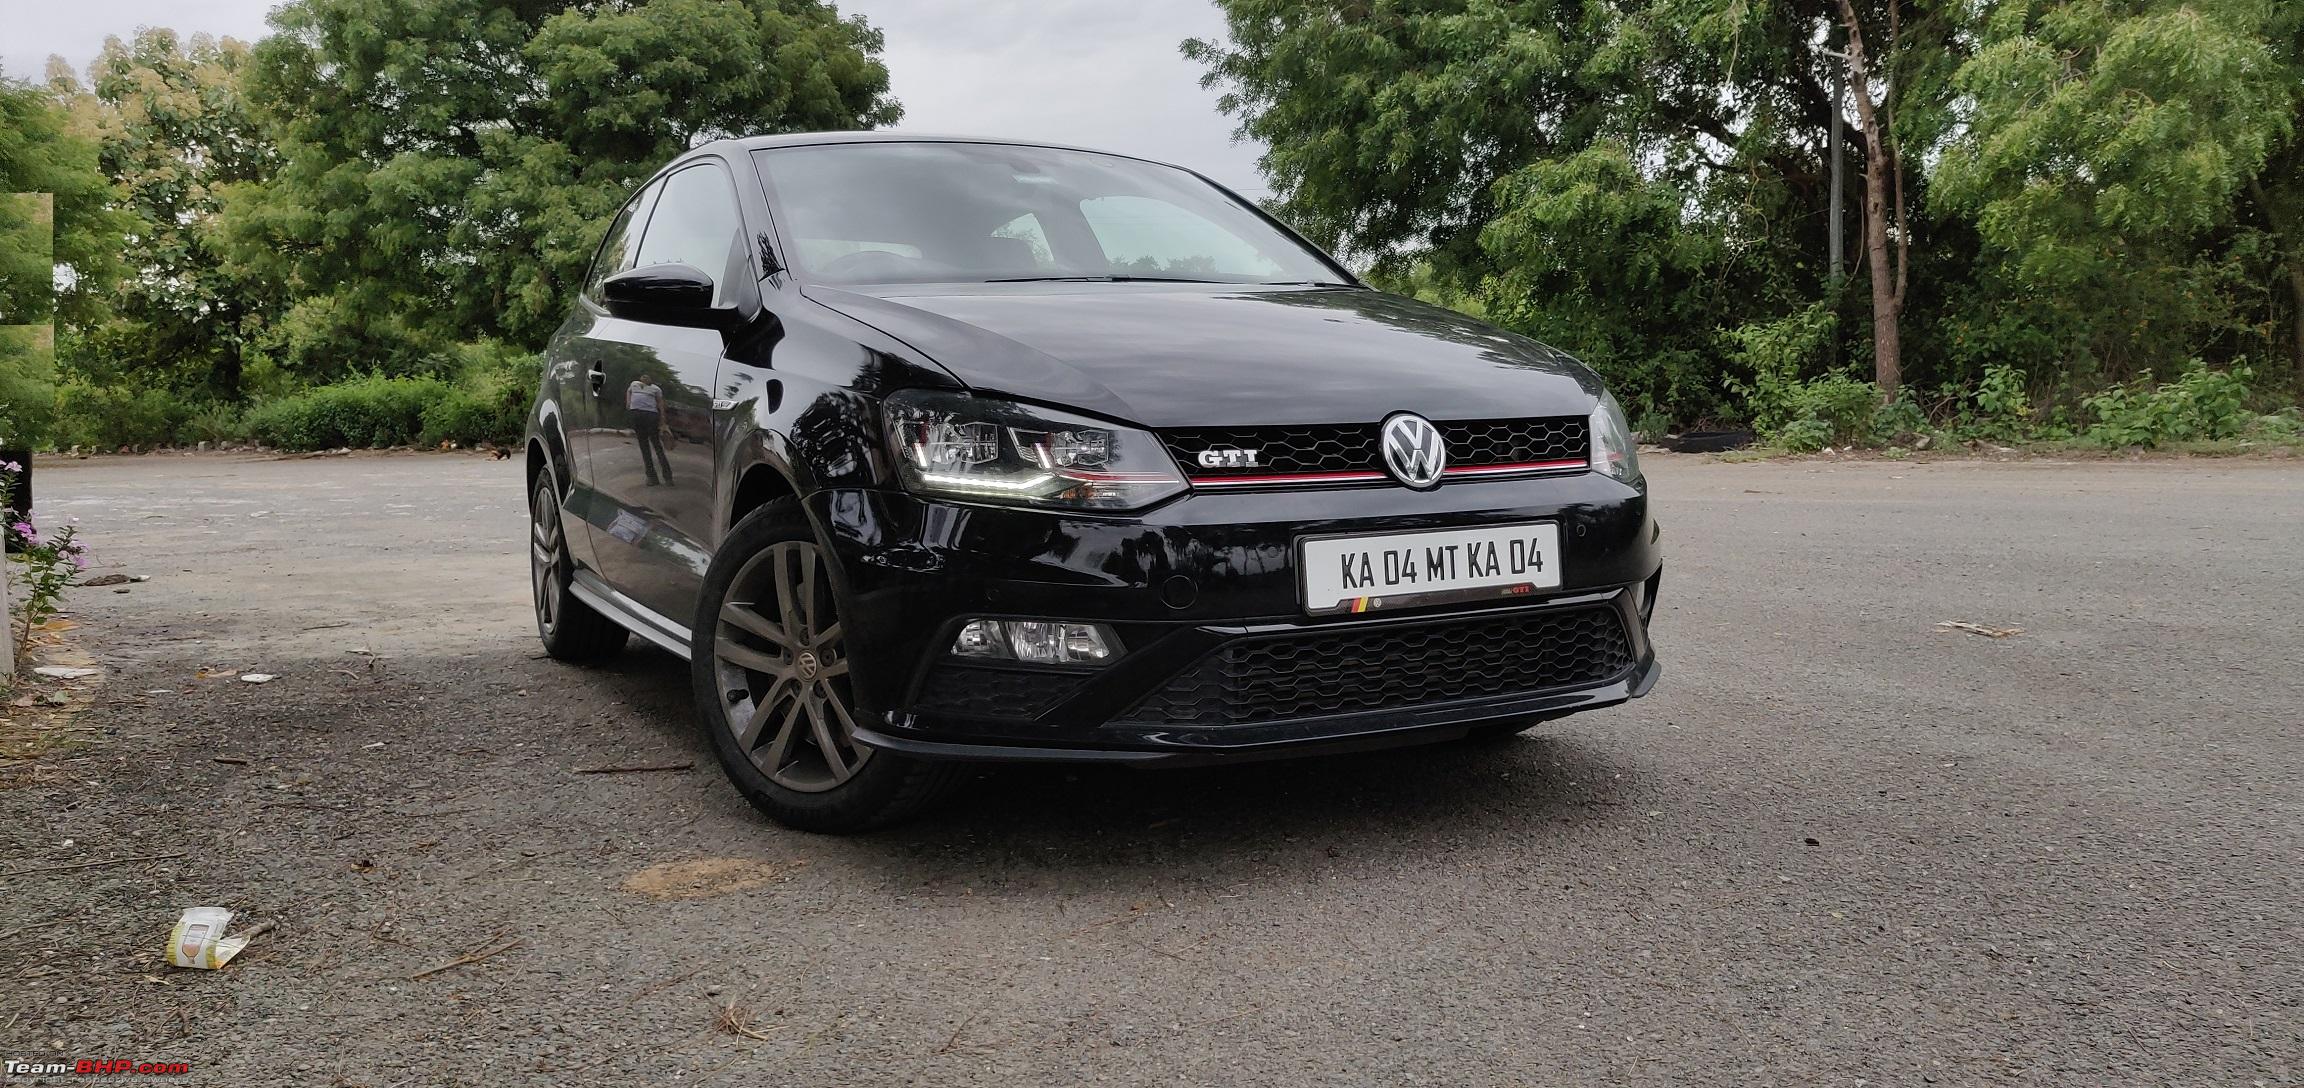 Hot Hatch Fever - My Volkswagen Polo GTI 1.8L TSI - Page 6 - Team-BHP